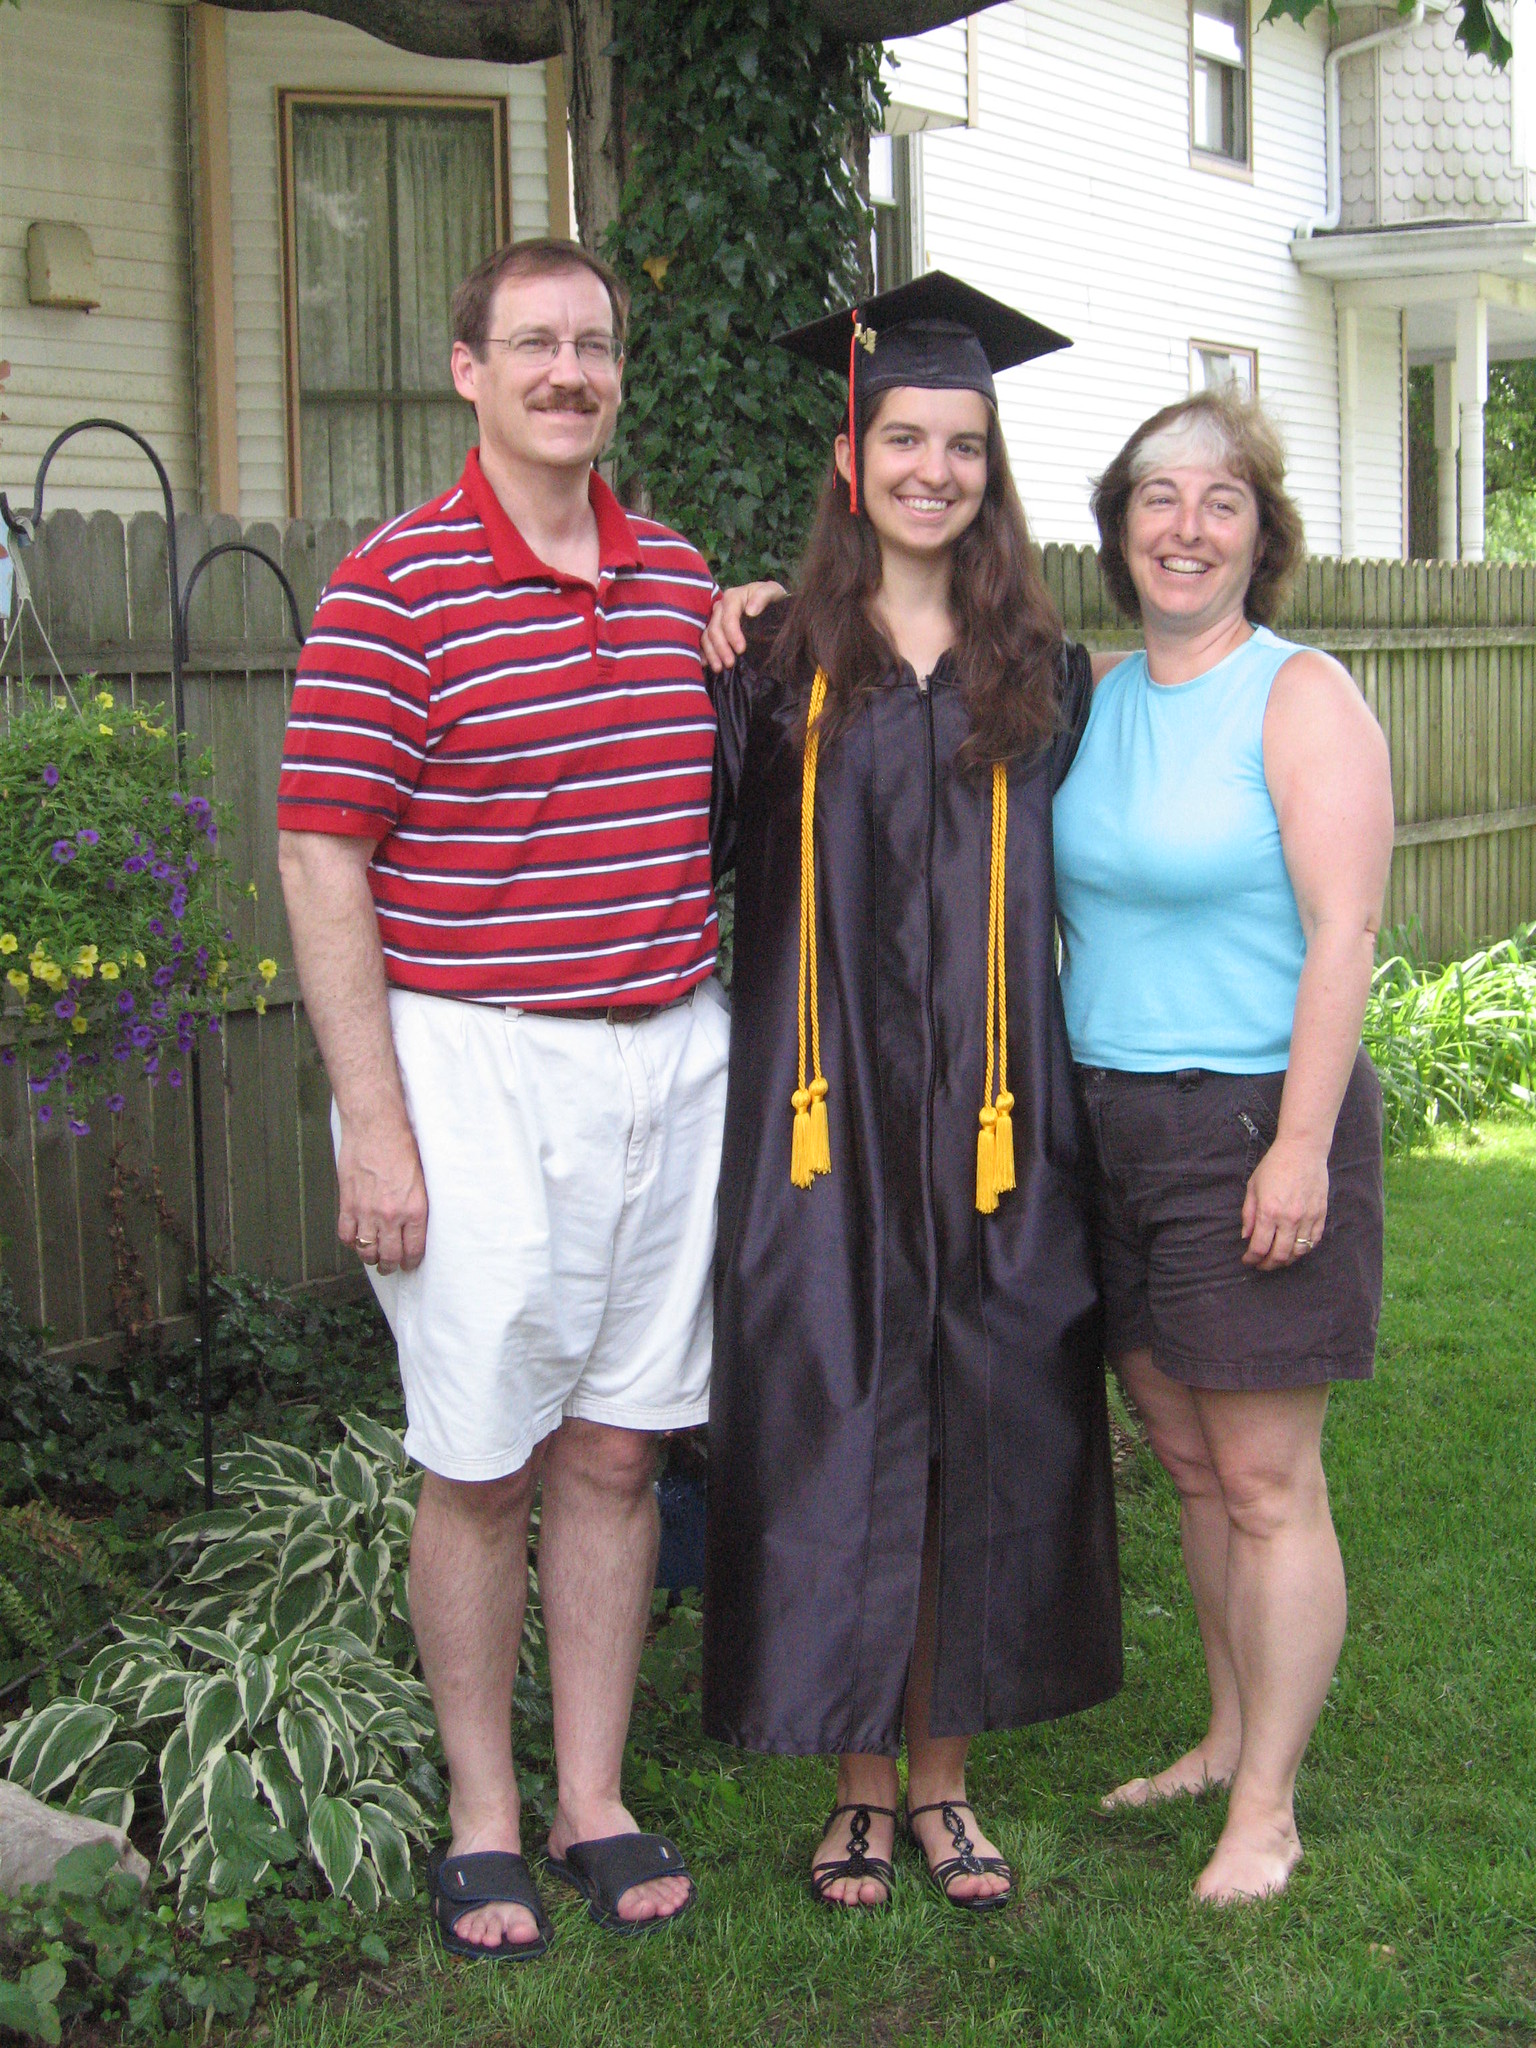 A woman wearing a graduation gown and cap while standing next to her parents | Source: flickr.com